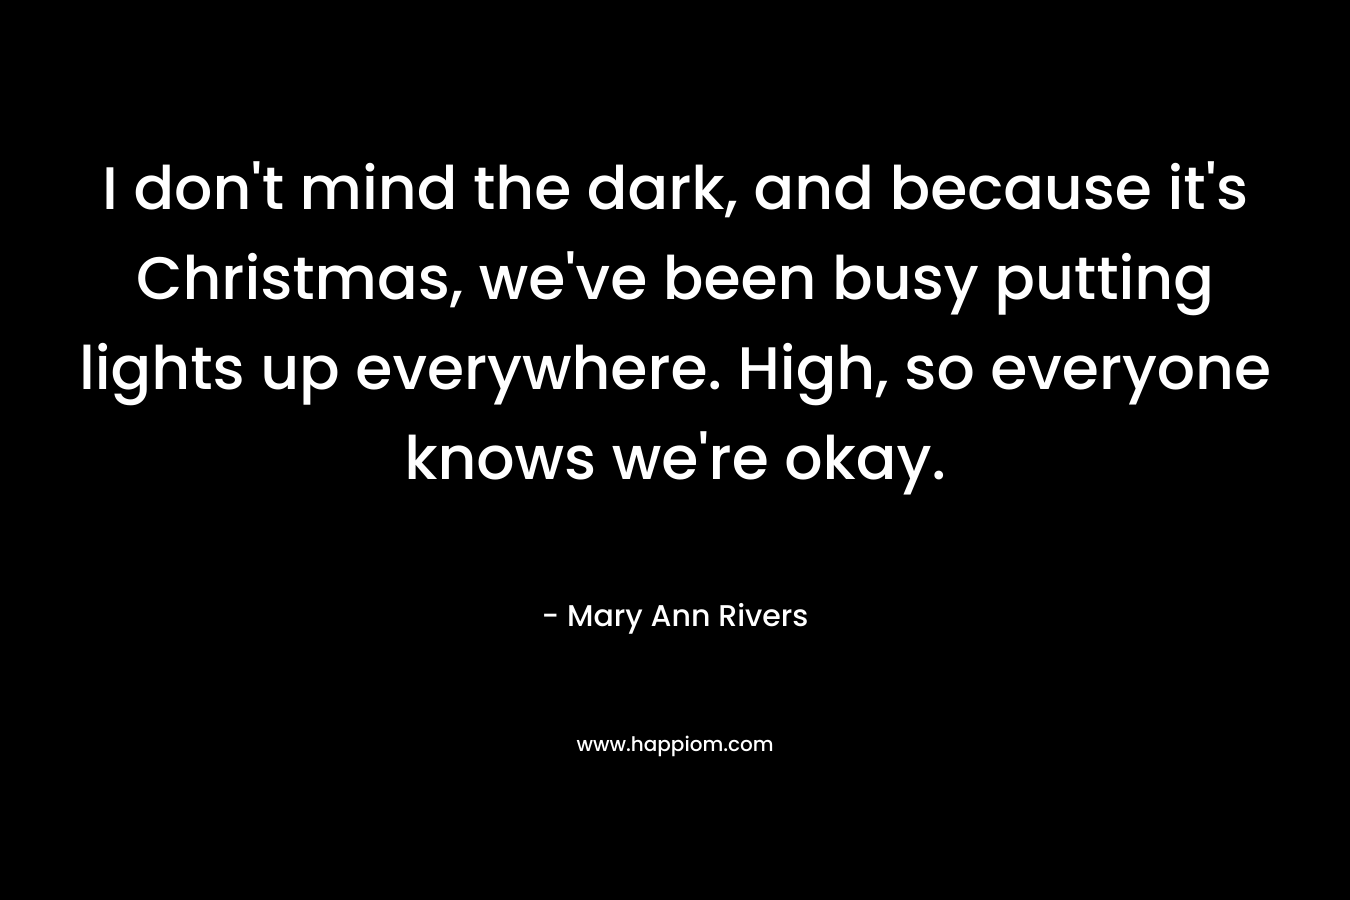 I don’t mind the dark, and because it’s Christmas, we’ve been busy putting lights up everywhere. High, so everyone knows we’re okay. – Mary Ann Rivers